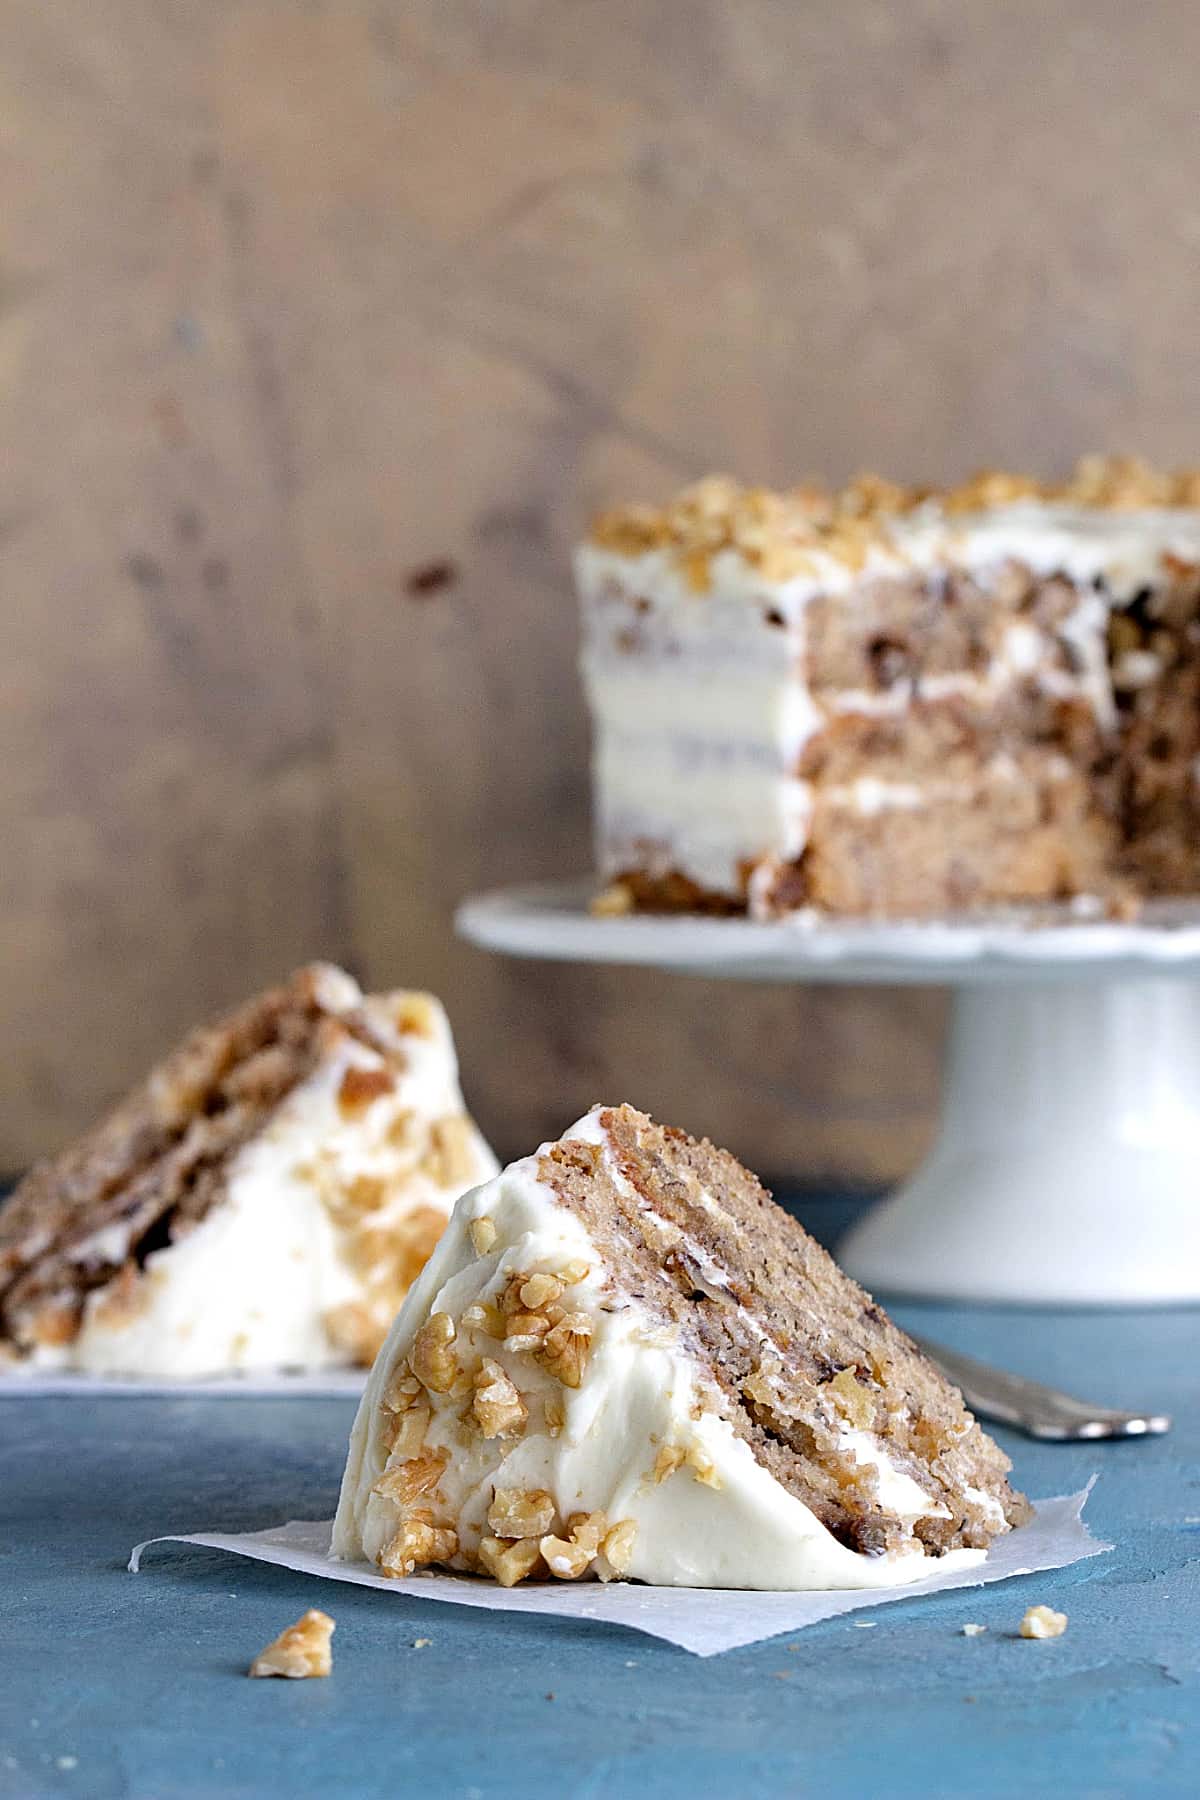 Slices of frosted layer cake with walnuts on a blue surface and brownish background with whole cake on a white cake stand.